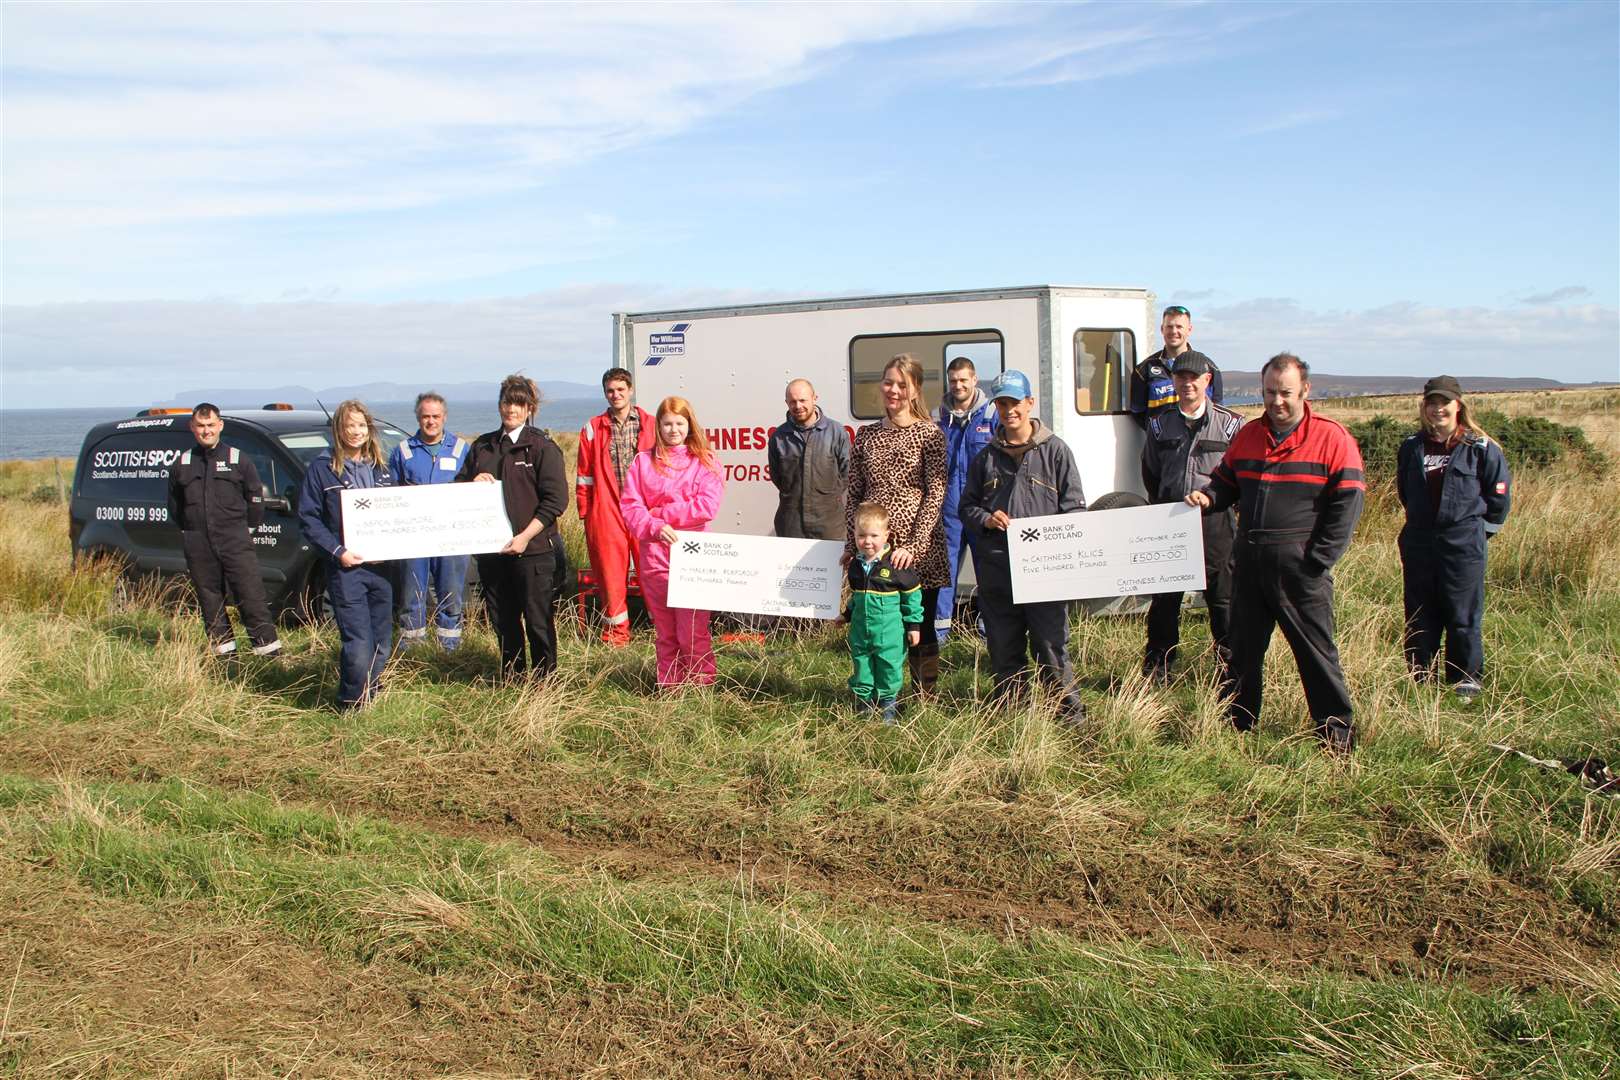 Cheques for £500 were presented by junior drivers to three local groups at the sixth autocross of the season. In the front row Nicola Donn (left), can be seen presenting a cheque to Christine Lord, of the Scottish SPCA Rescue & Rehoming centre Balmore, while Immy Durrand hands over £500 to Jacqueline Keith and young George Coghill of Halkirk Playgroup, and Ryan Henderson presents the cheque to club chairman Lenny Humphries for Caithness Klics young carers. Looking on are several drivers and mechanics. Picture: Willie Mackay